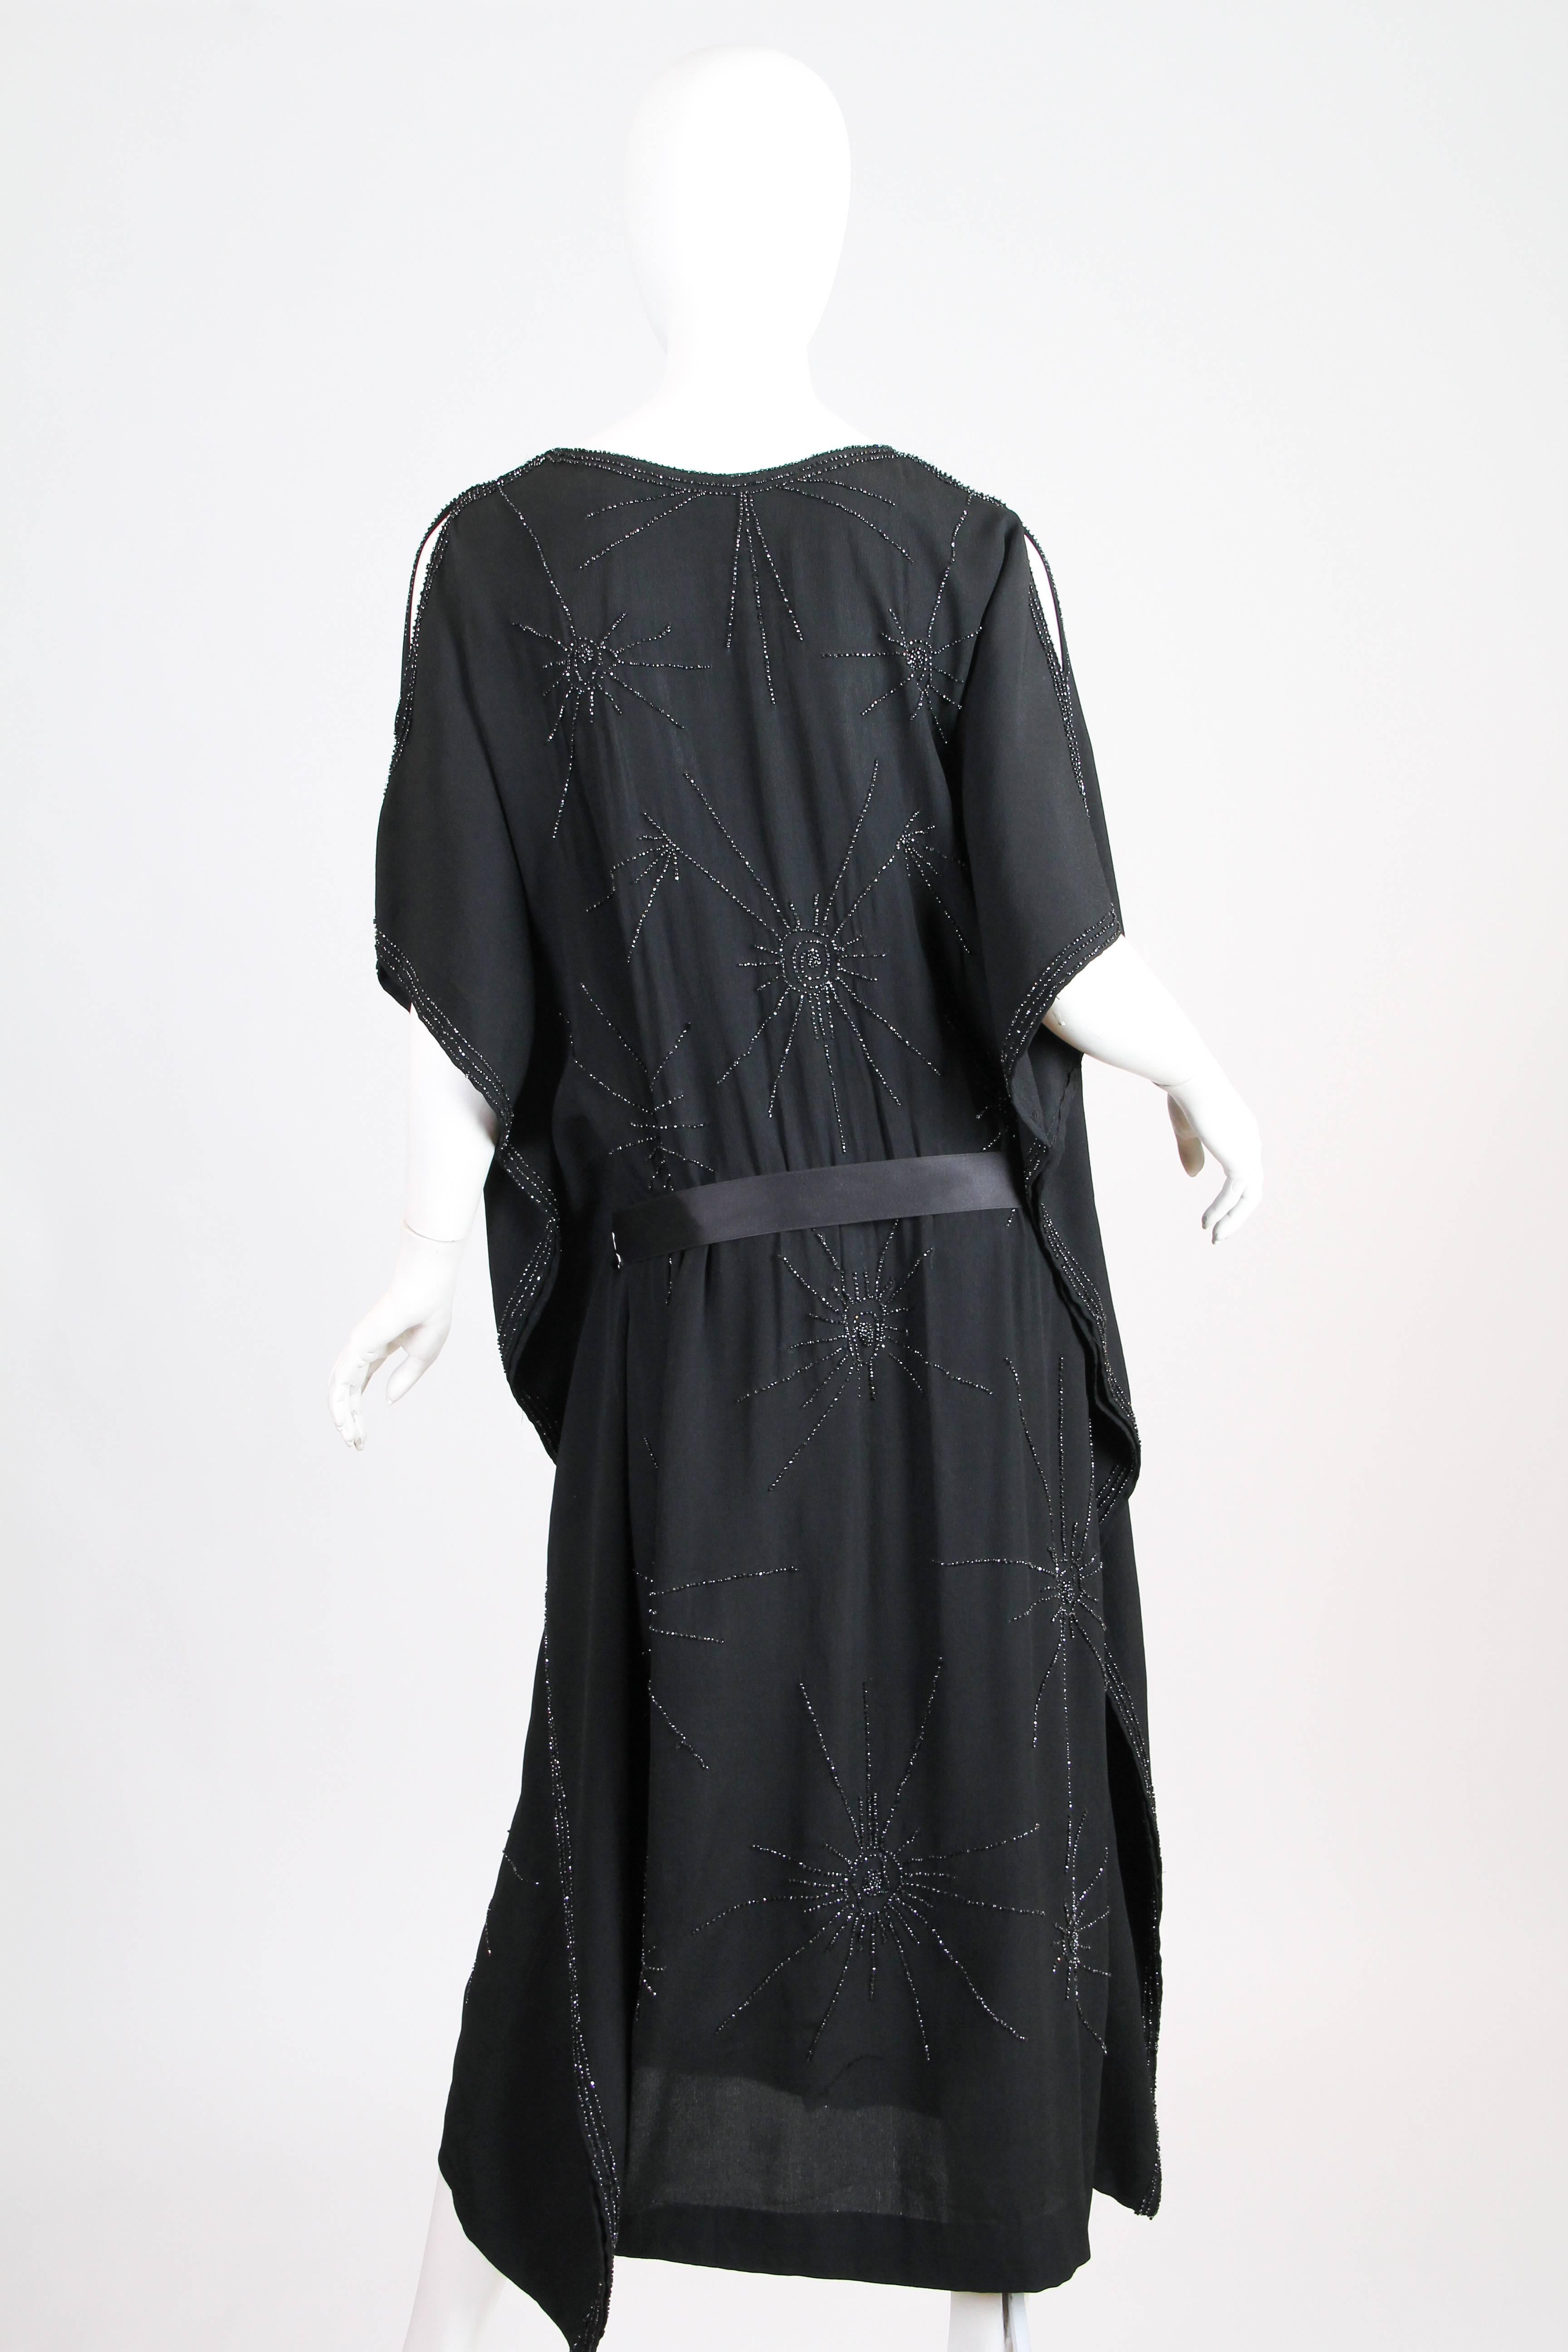 Women's Early 1920s Dress in the style of Vionnet